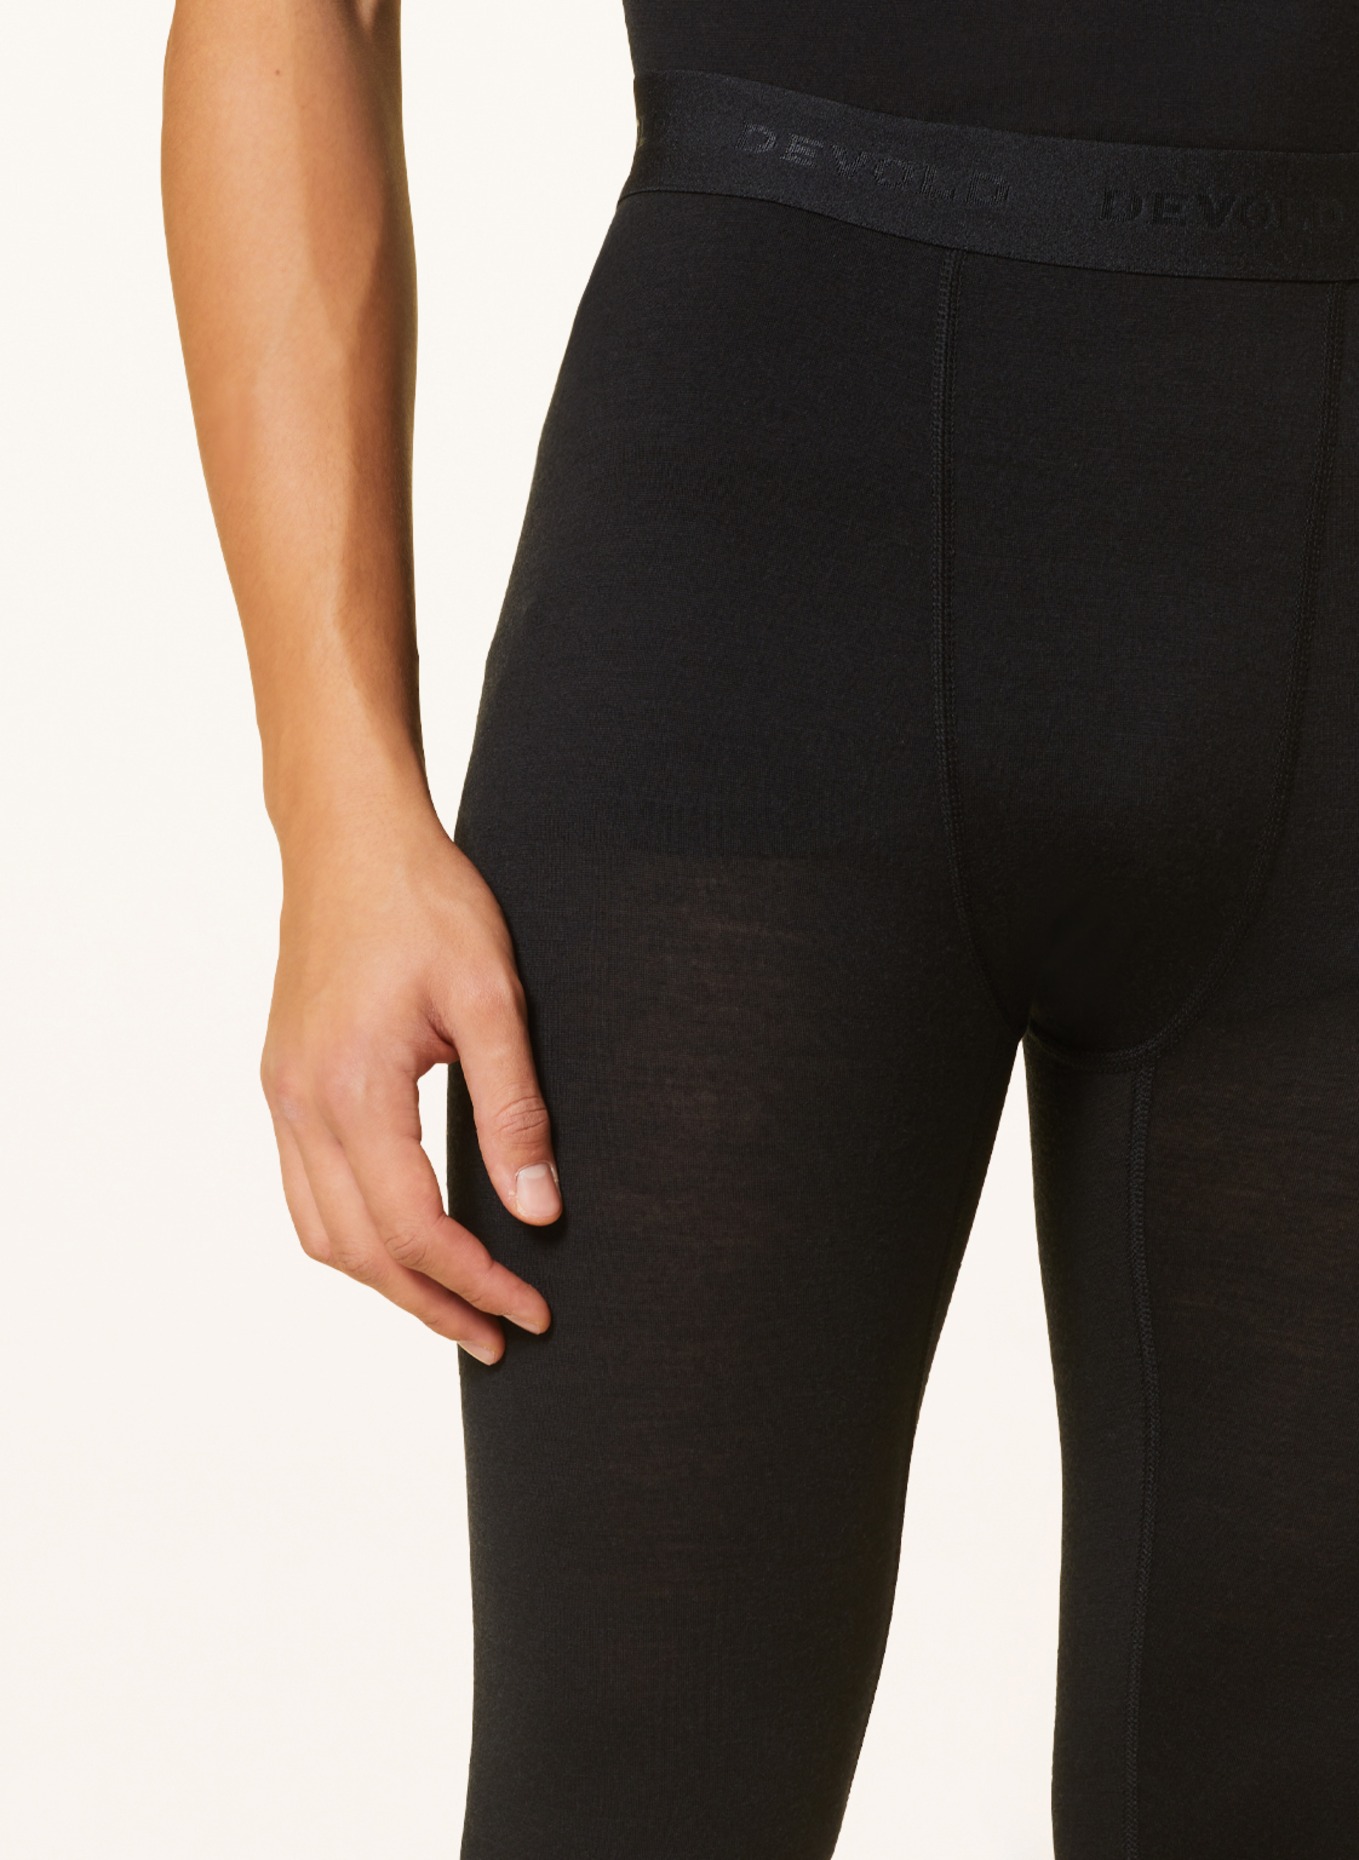 DEVOLD Functional underwear and baselayers BREEZE in merino wool, Color: BLACK (Image 5)